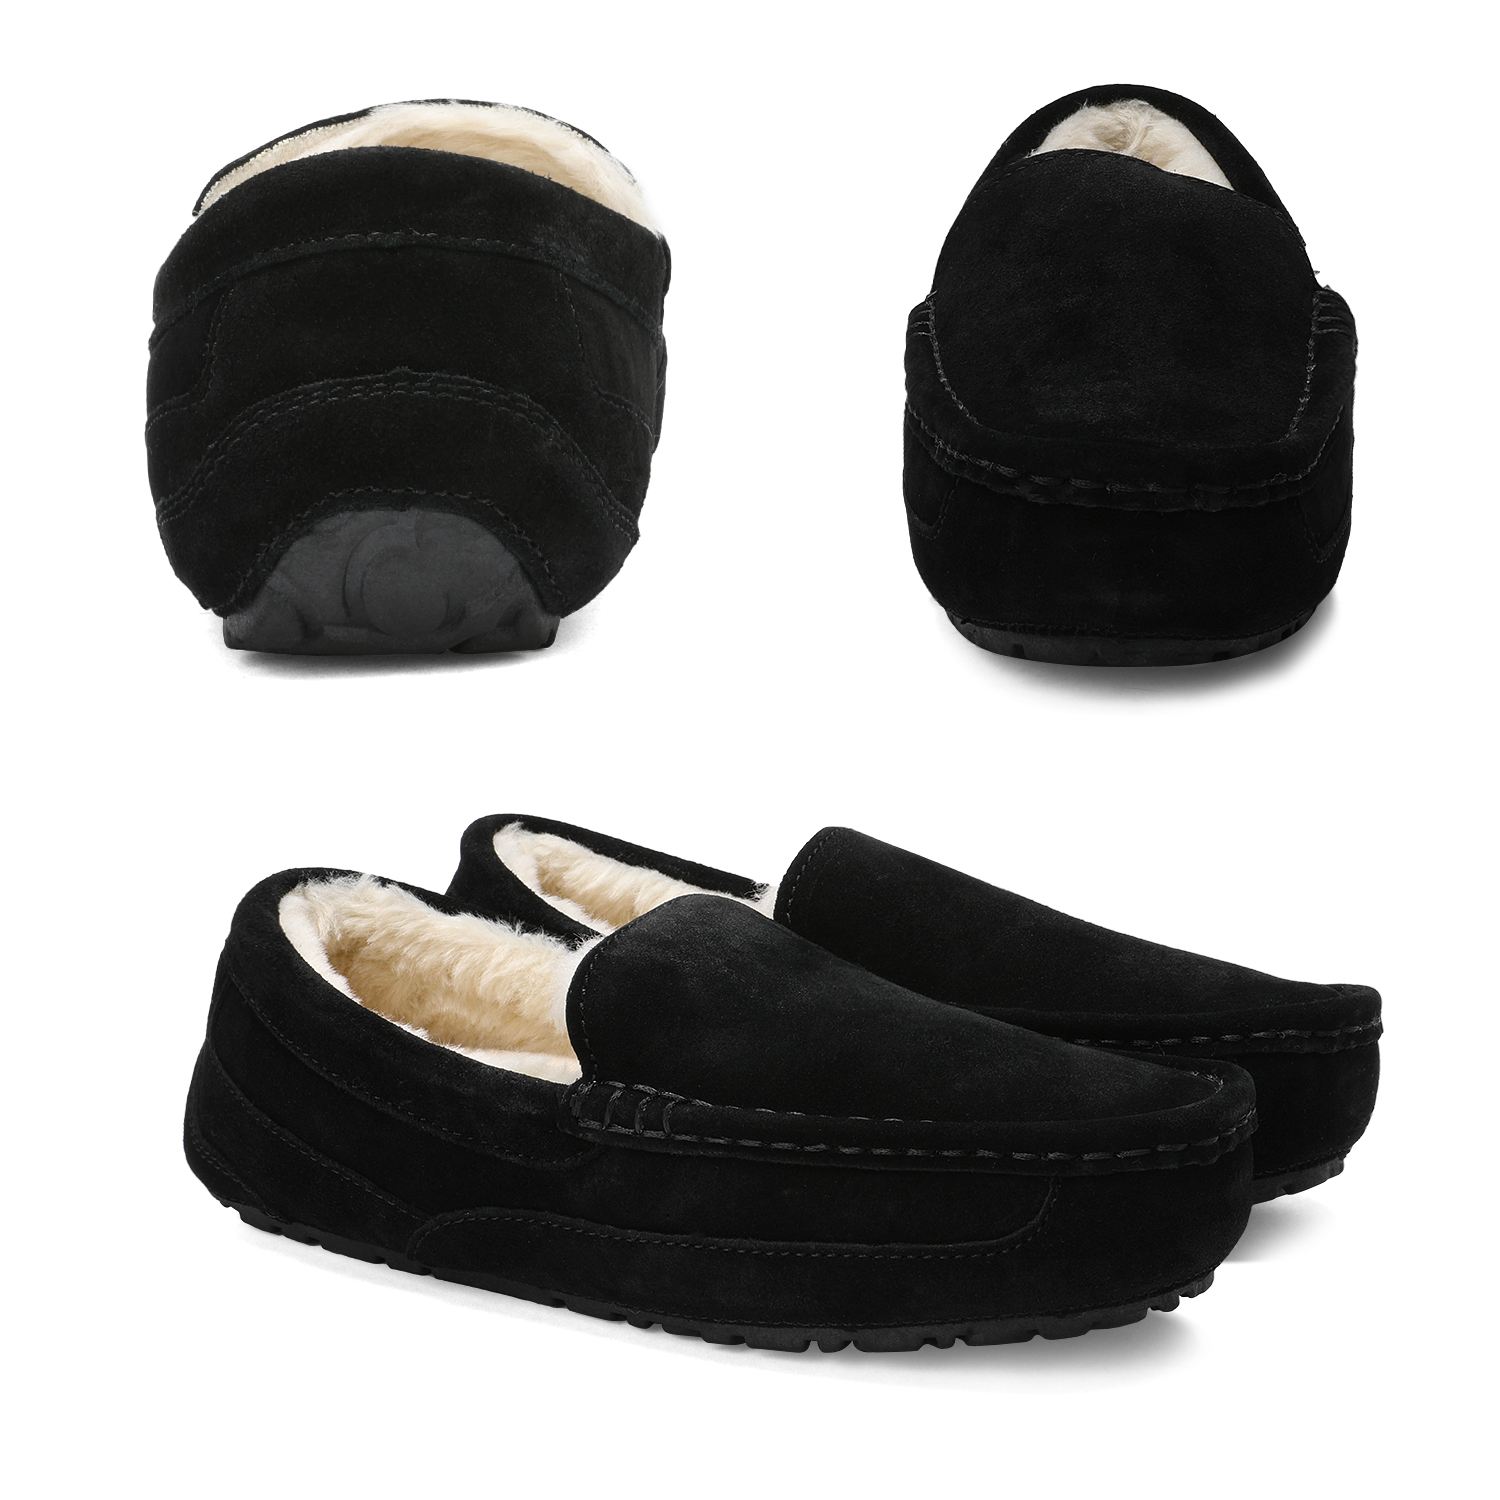 Dream Pairs New Soft Mens Au-Loafer Indoor Warm Moccasins Slippers Flats Shoes Au-Loafer-01 Black Size 7 - image 5 of 5